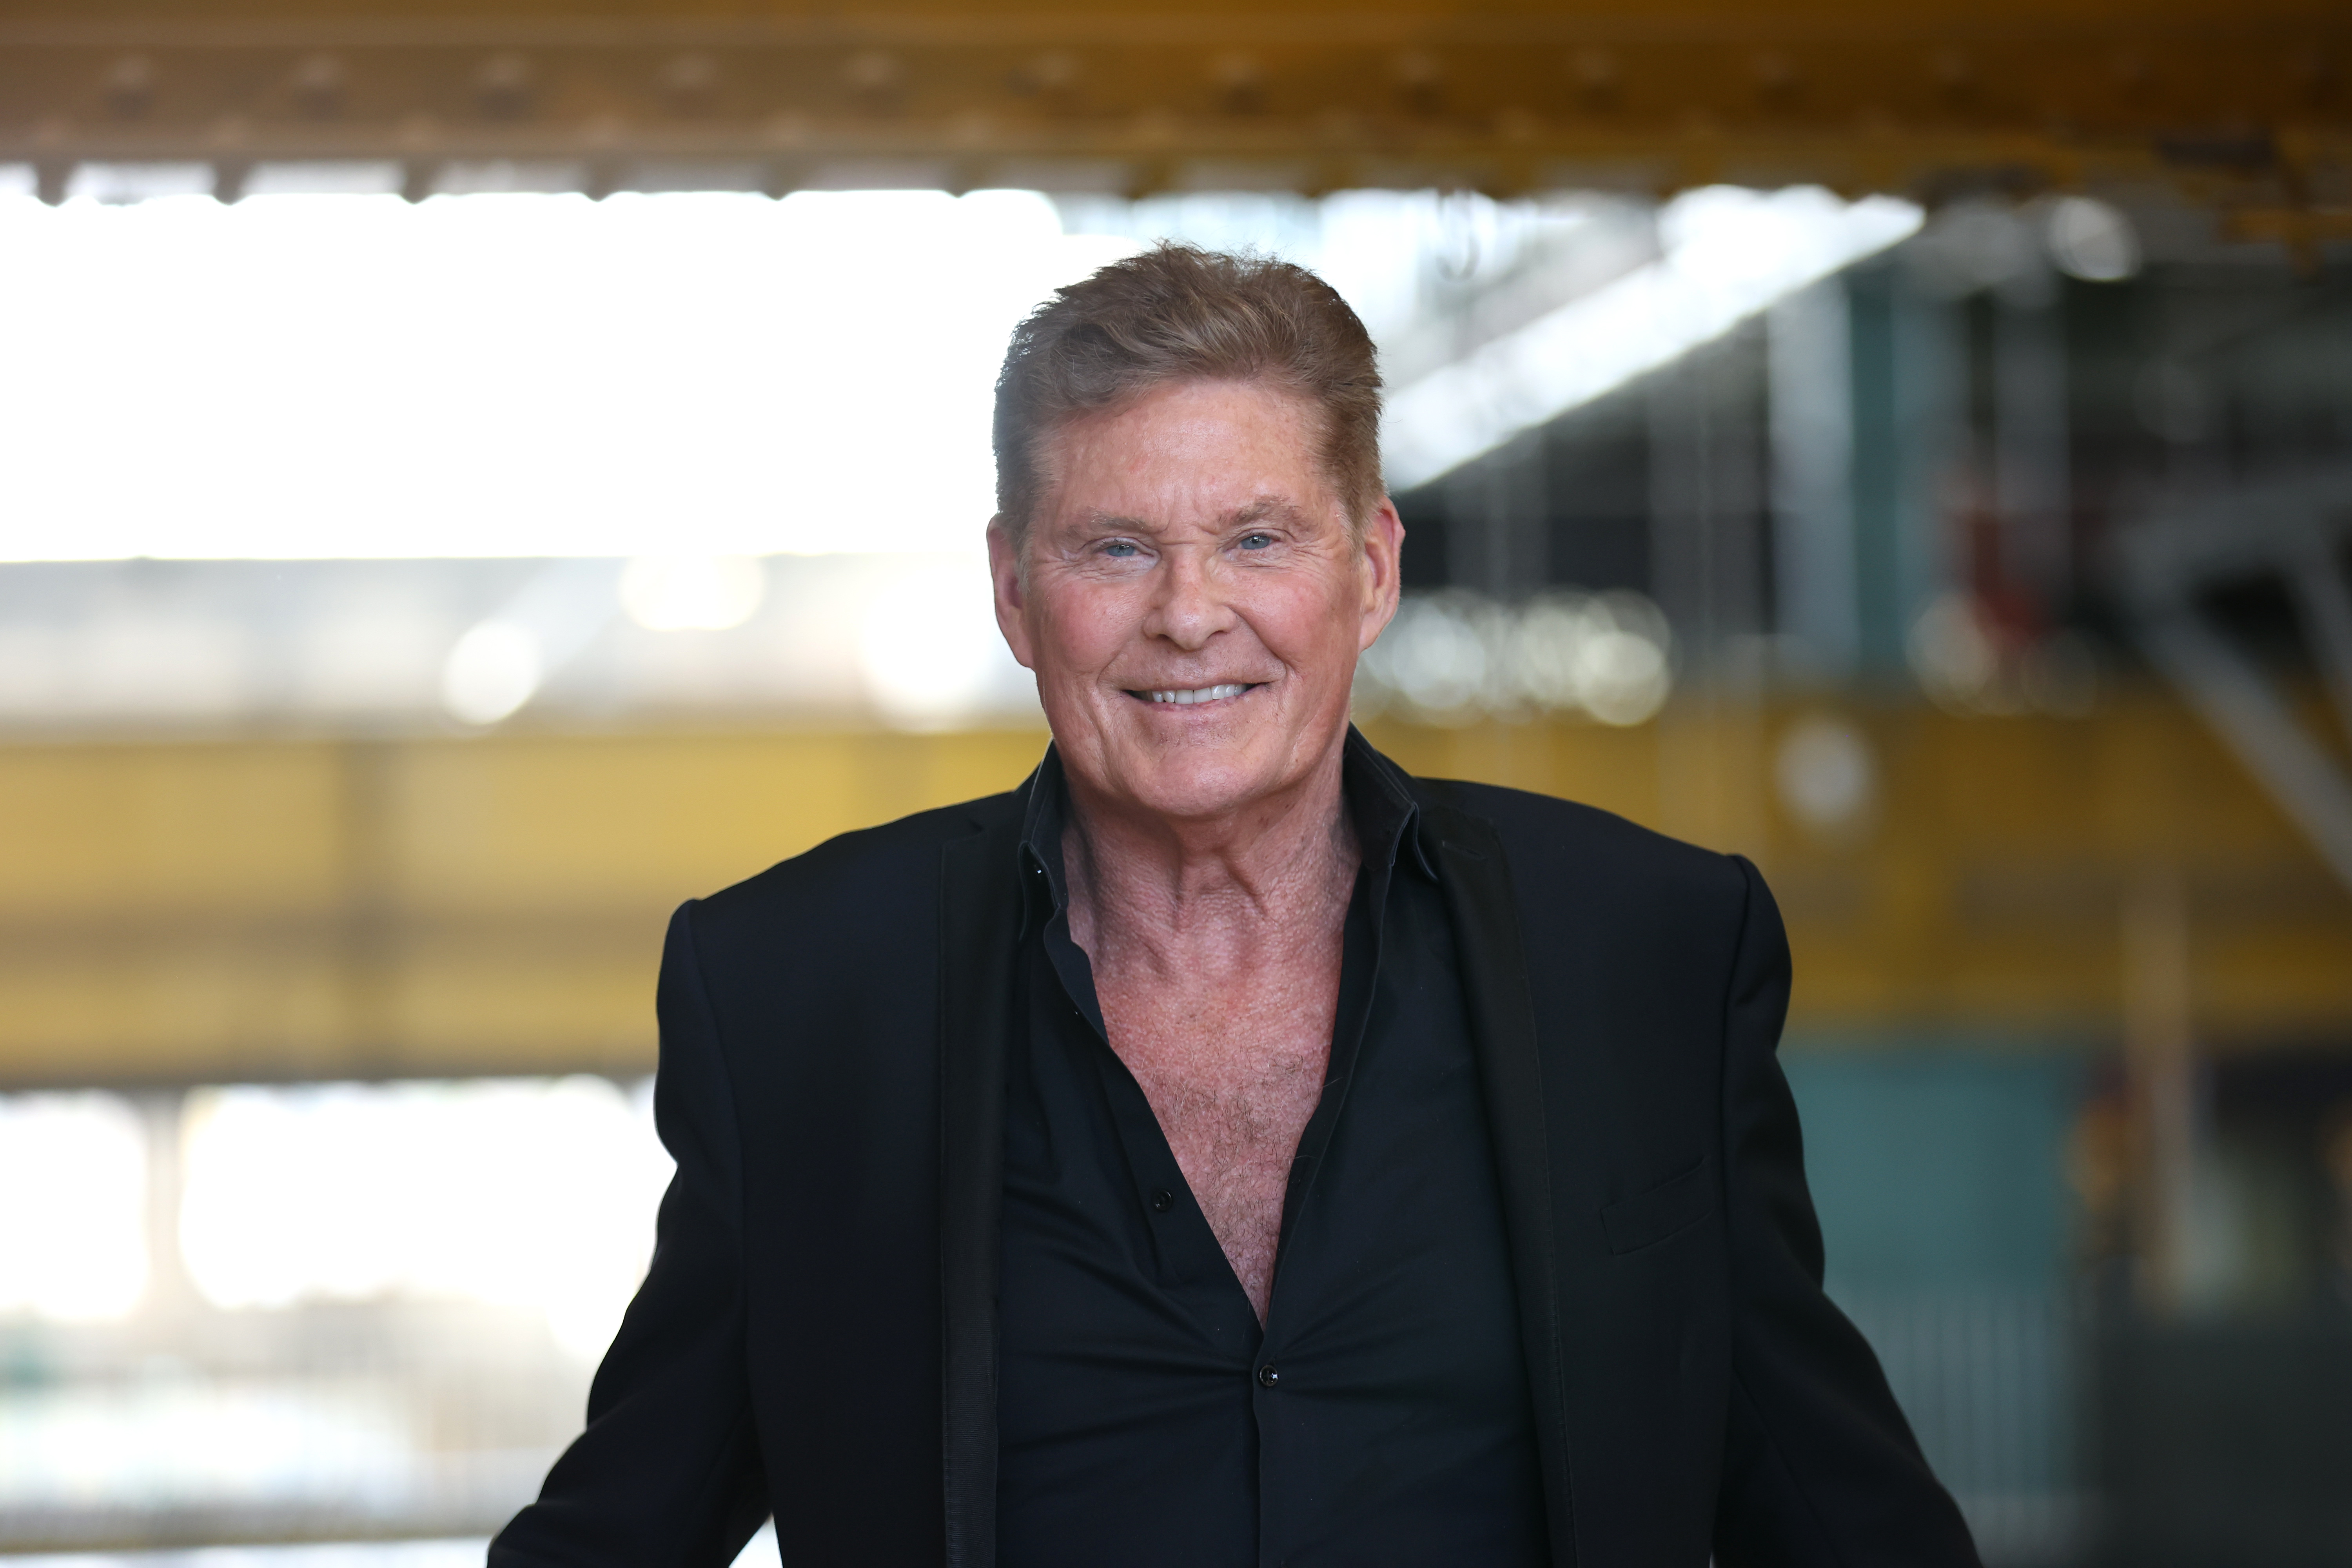 David Hasselhoff at his Tour 2023 press lunch at WACA Restaurant Motorworld Munich on October 18, 2022 in Munich, Germany. | Source: Getty Images